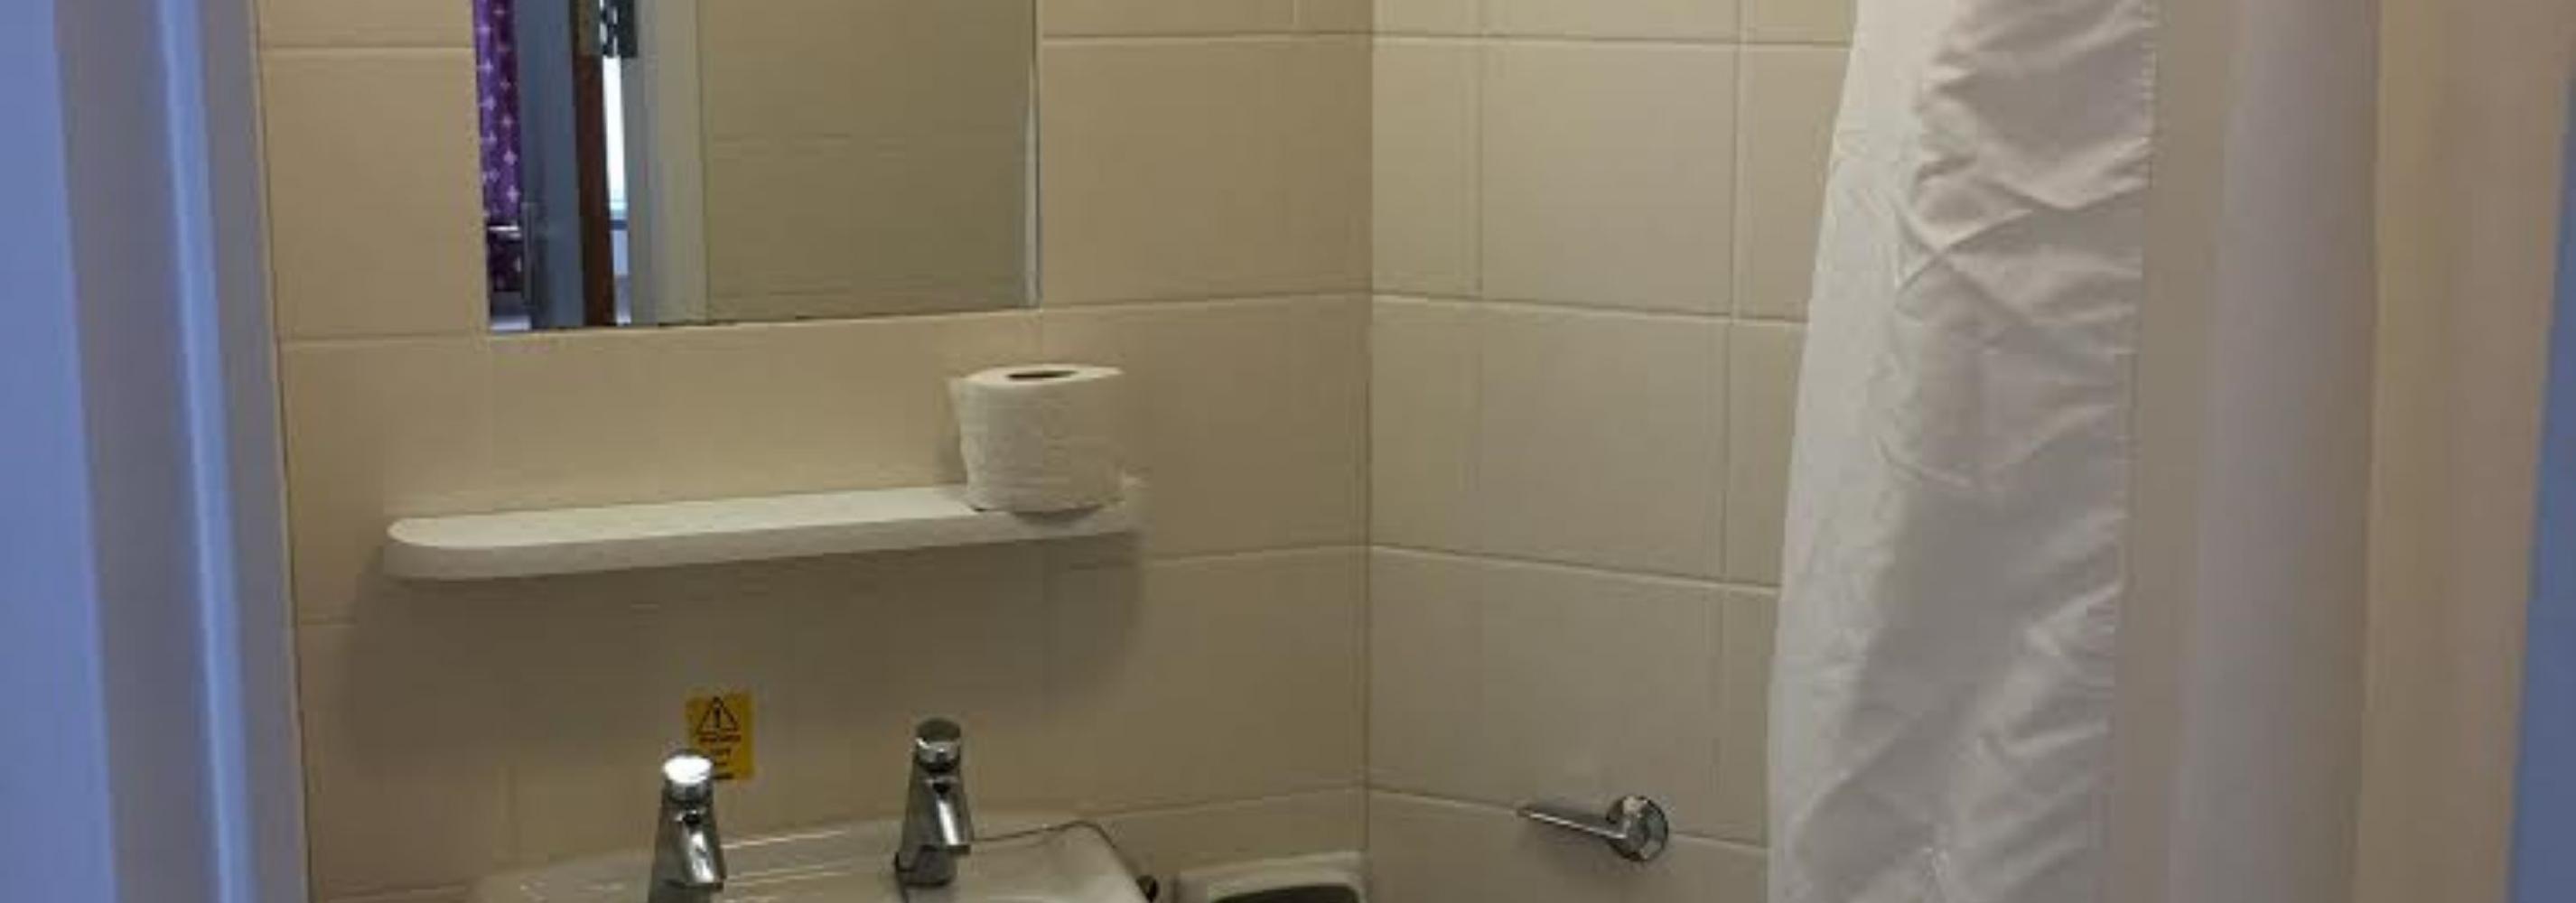 White shower room with show curtain to the right, basin to the left with mirror and light above. Toilet in the middle.